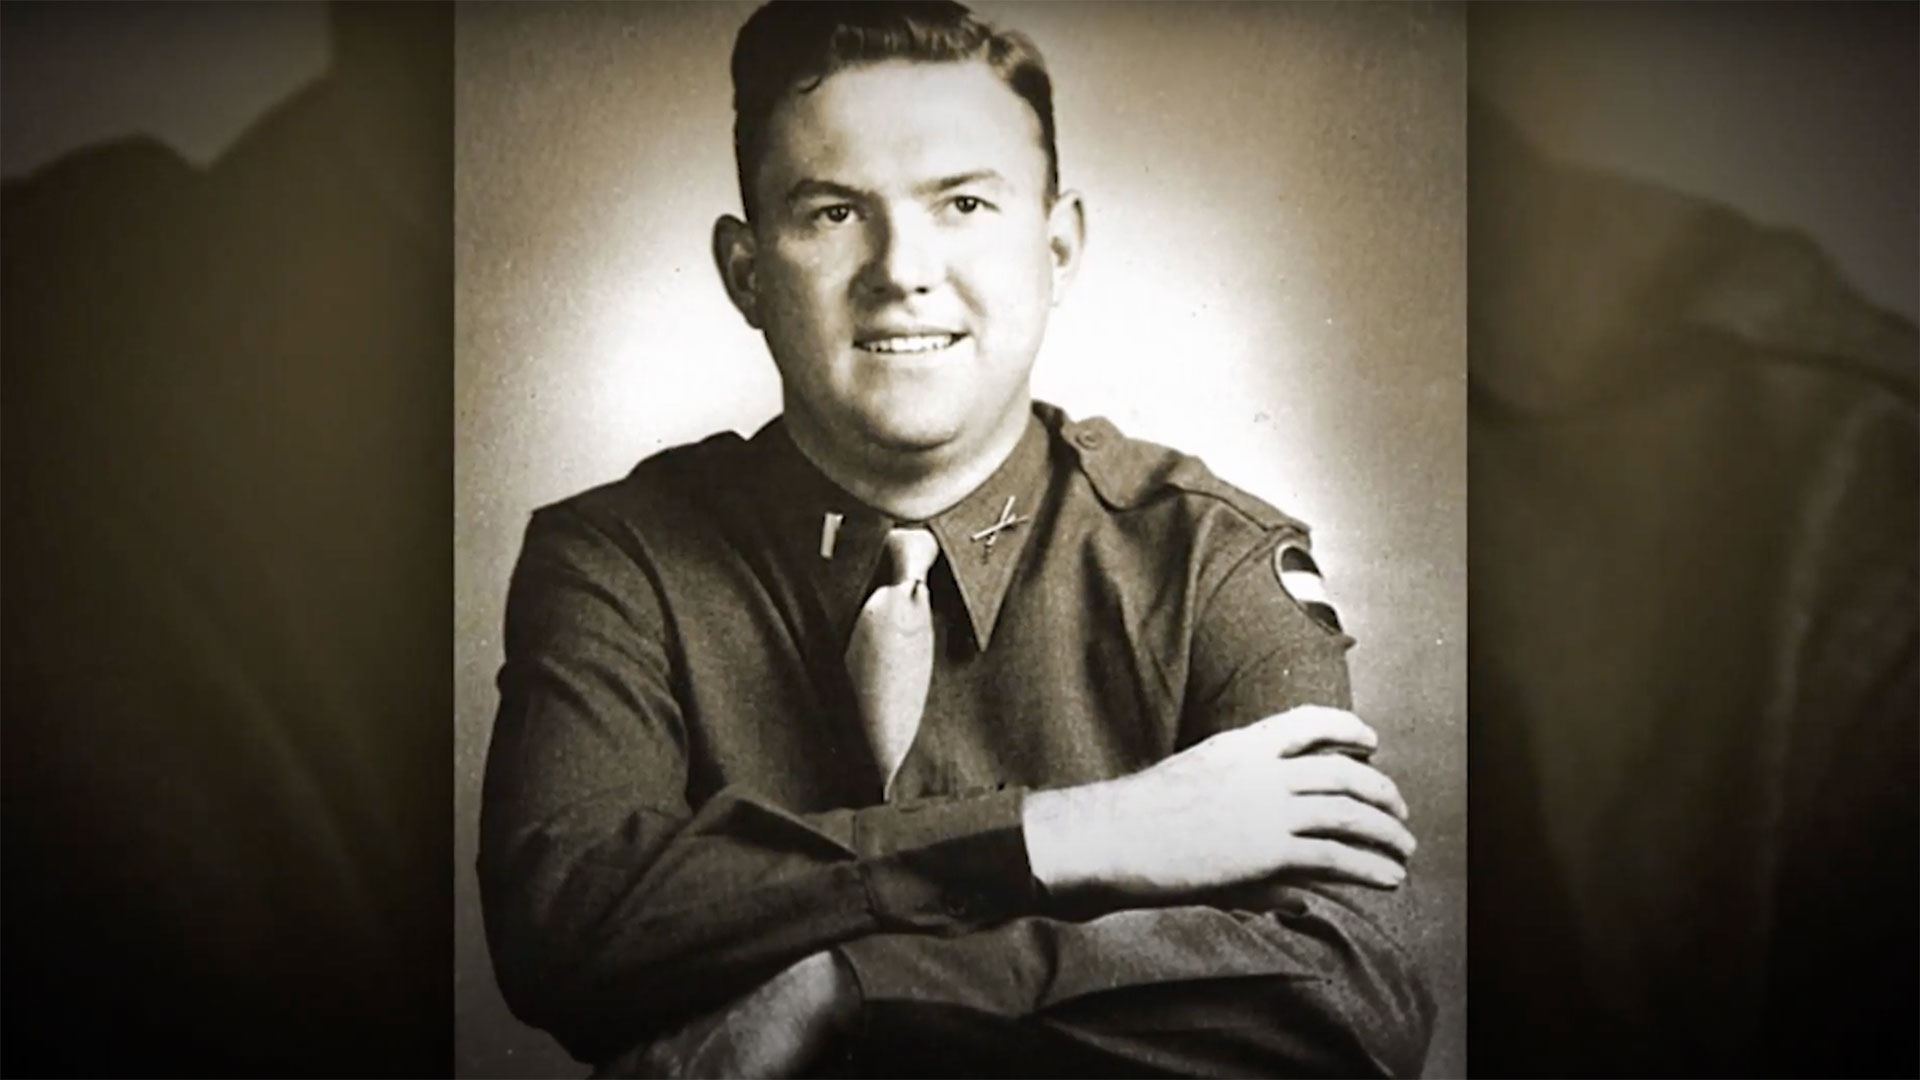 2nd Lt. Jimmie W. Monteith Jr., who was killed while leading his men against German positions at the "F-1" draw at Omaha beach. He was posthumously awarded the Medal of Honor.